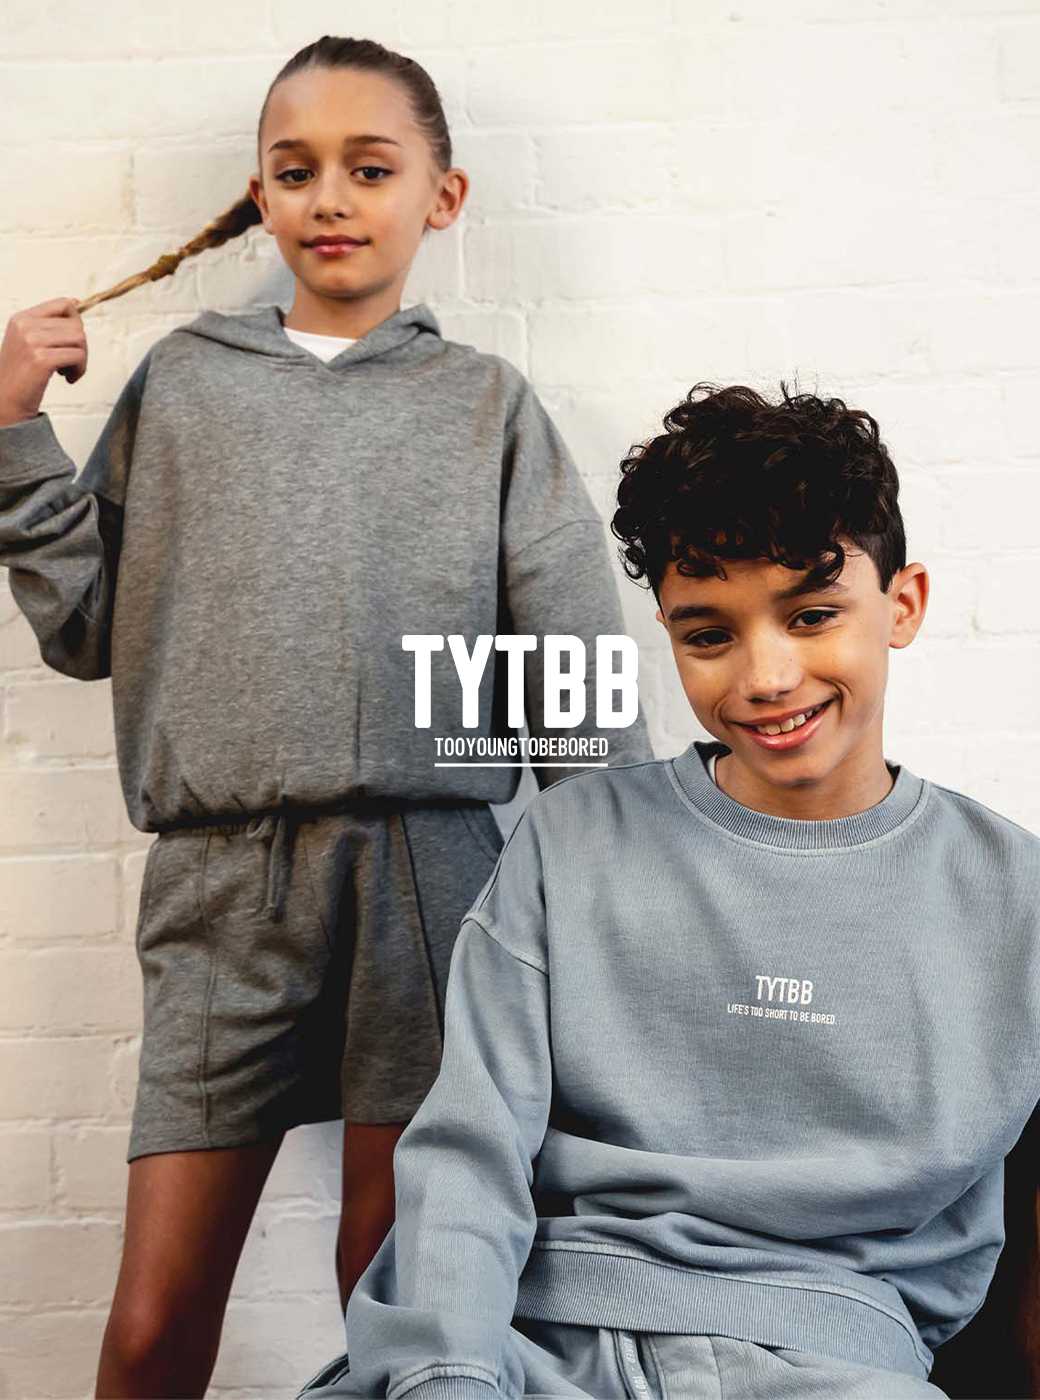 Too young to be bored. Shop now.